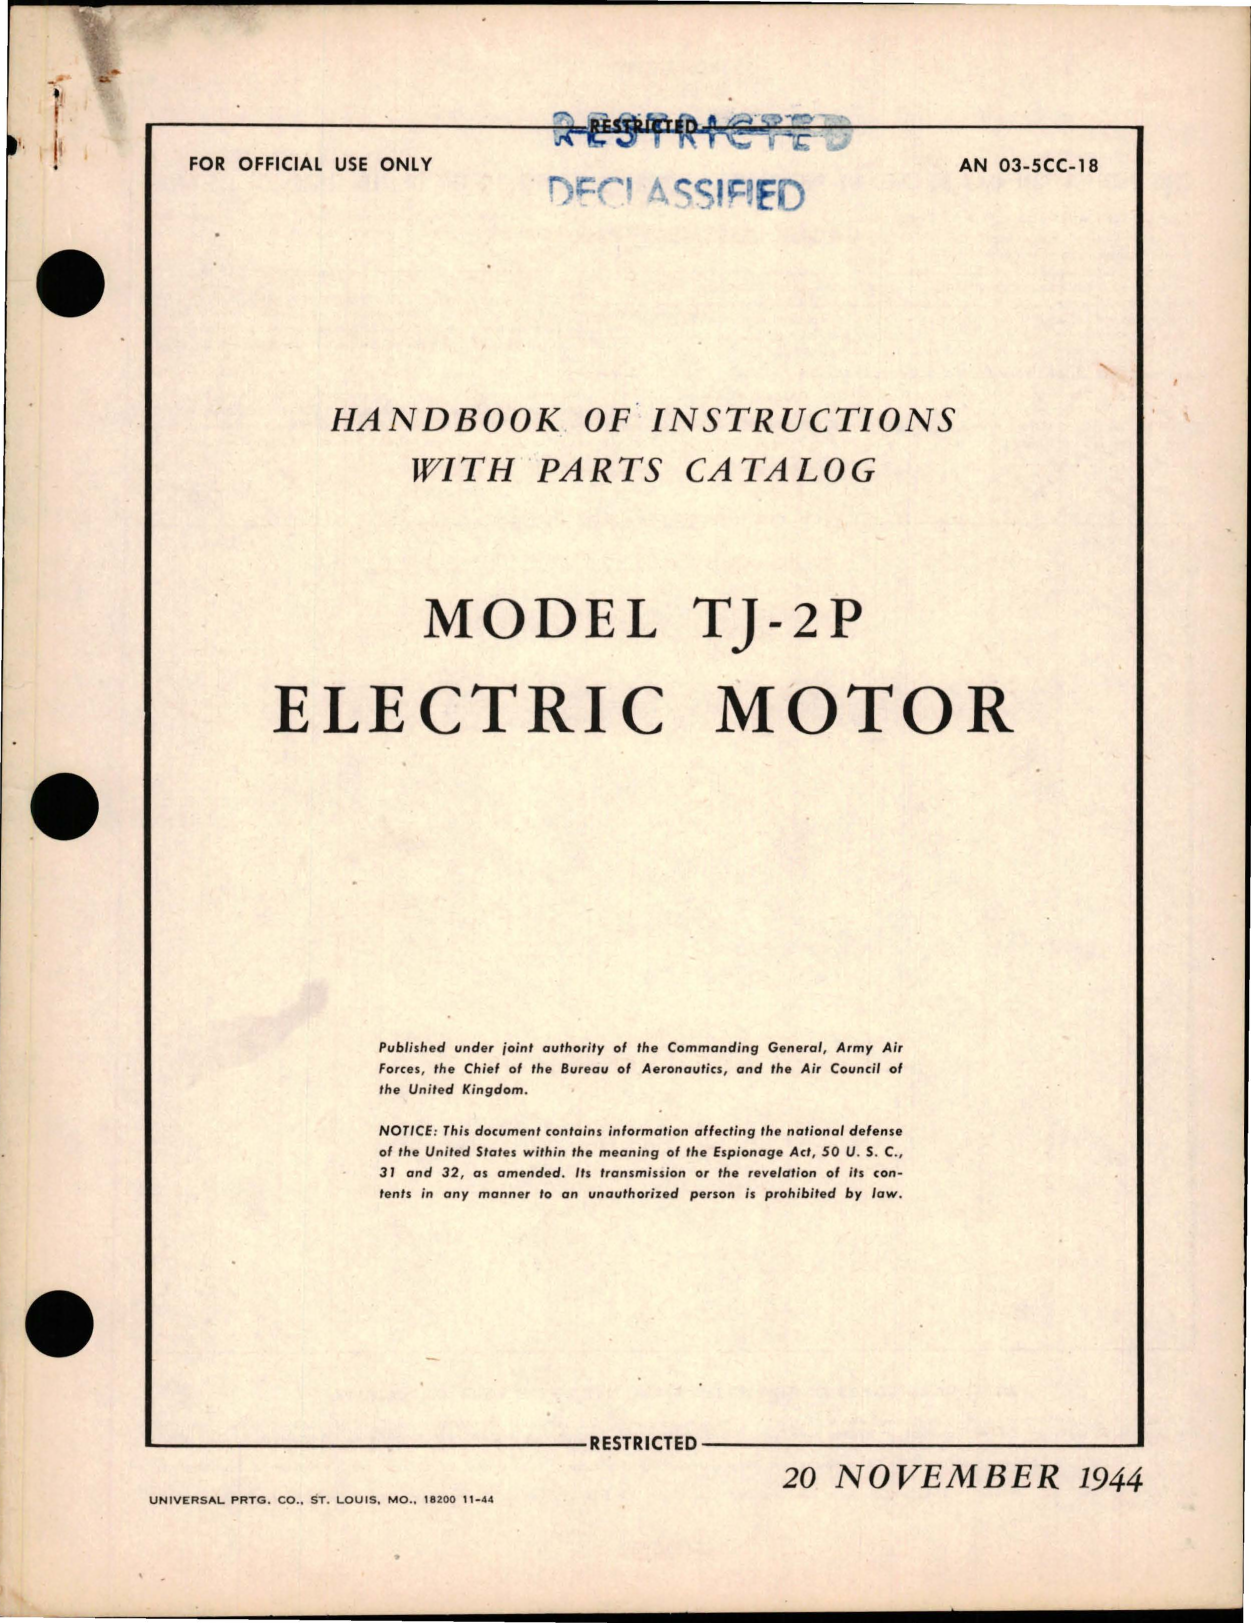 Sample page 1 from AirCorps Library document: Instructions with Parts Catalog for Electric Motor - Model TJ-2P